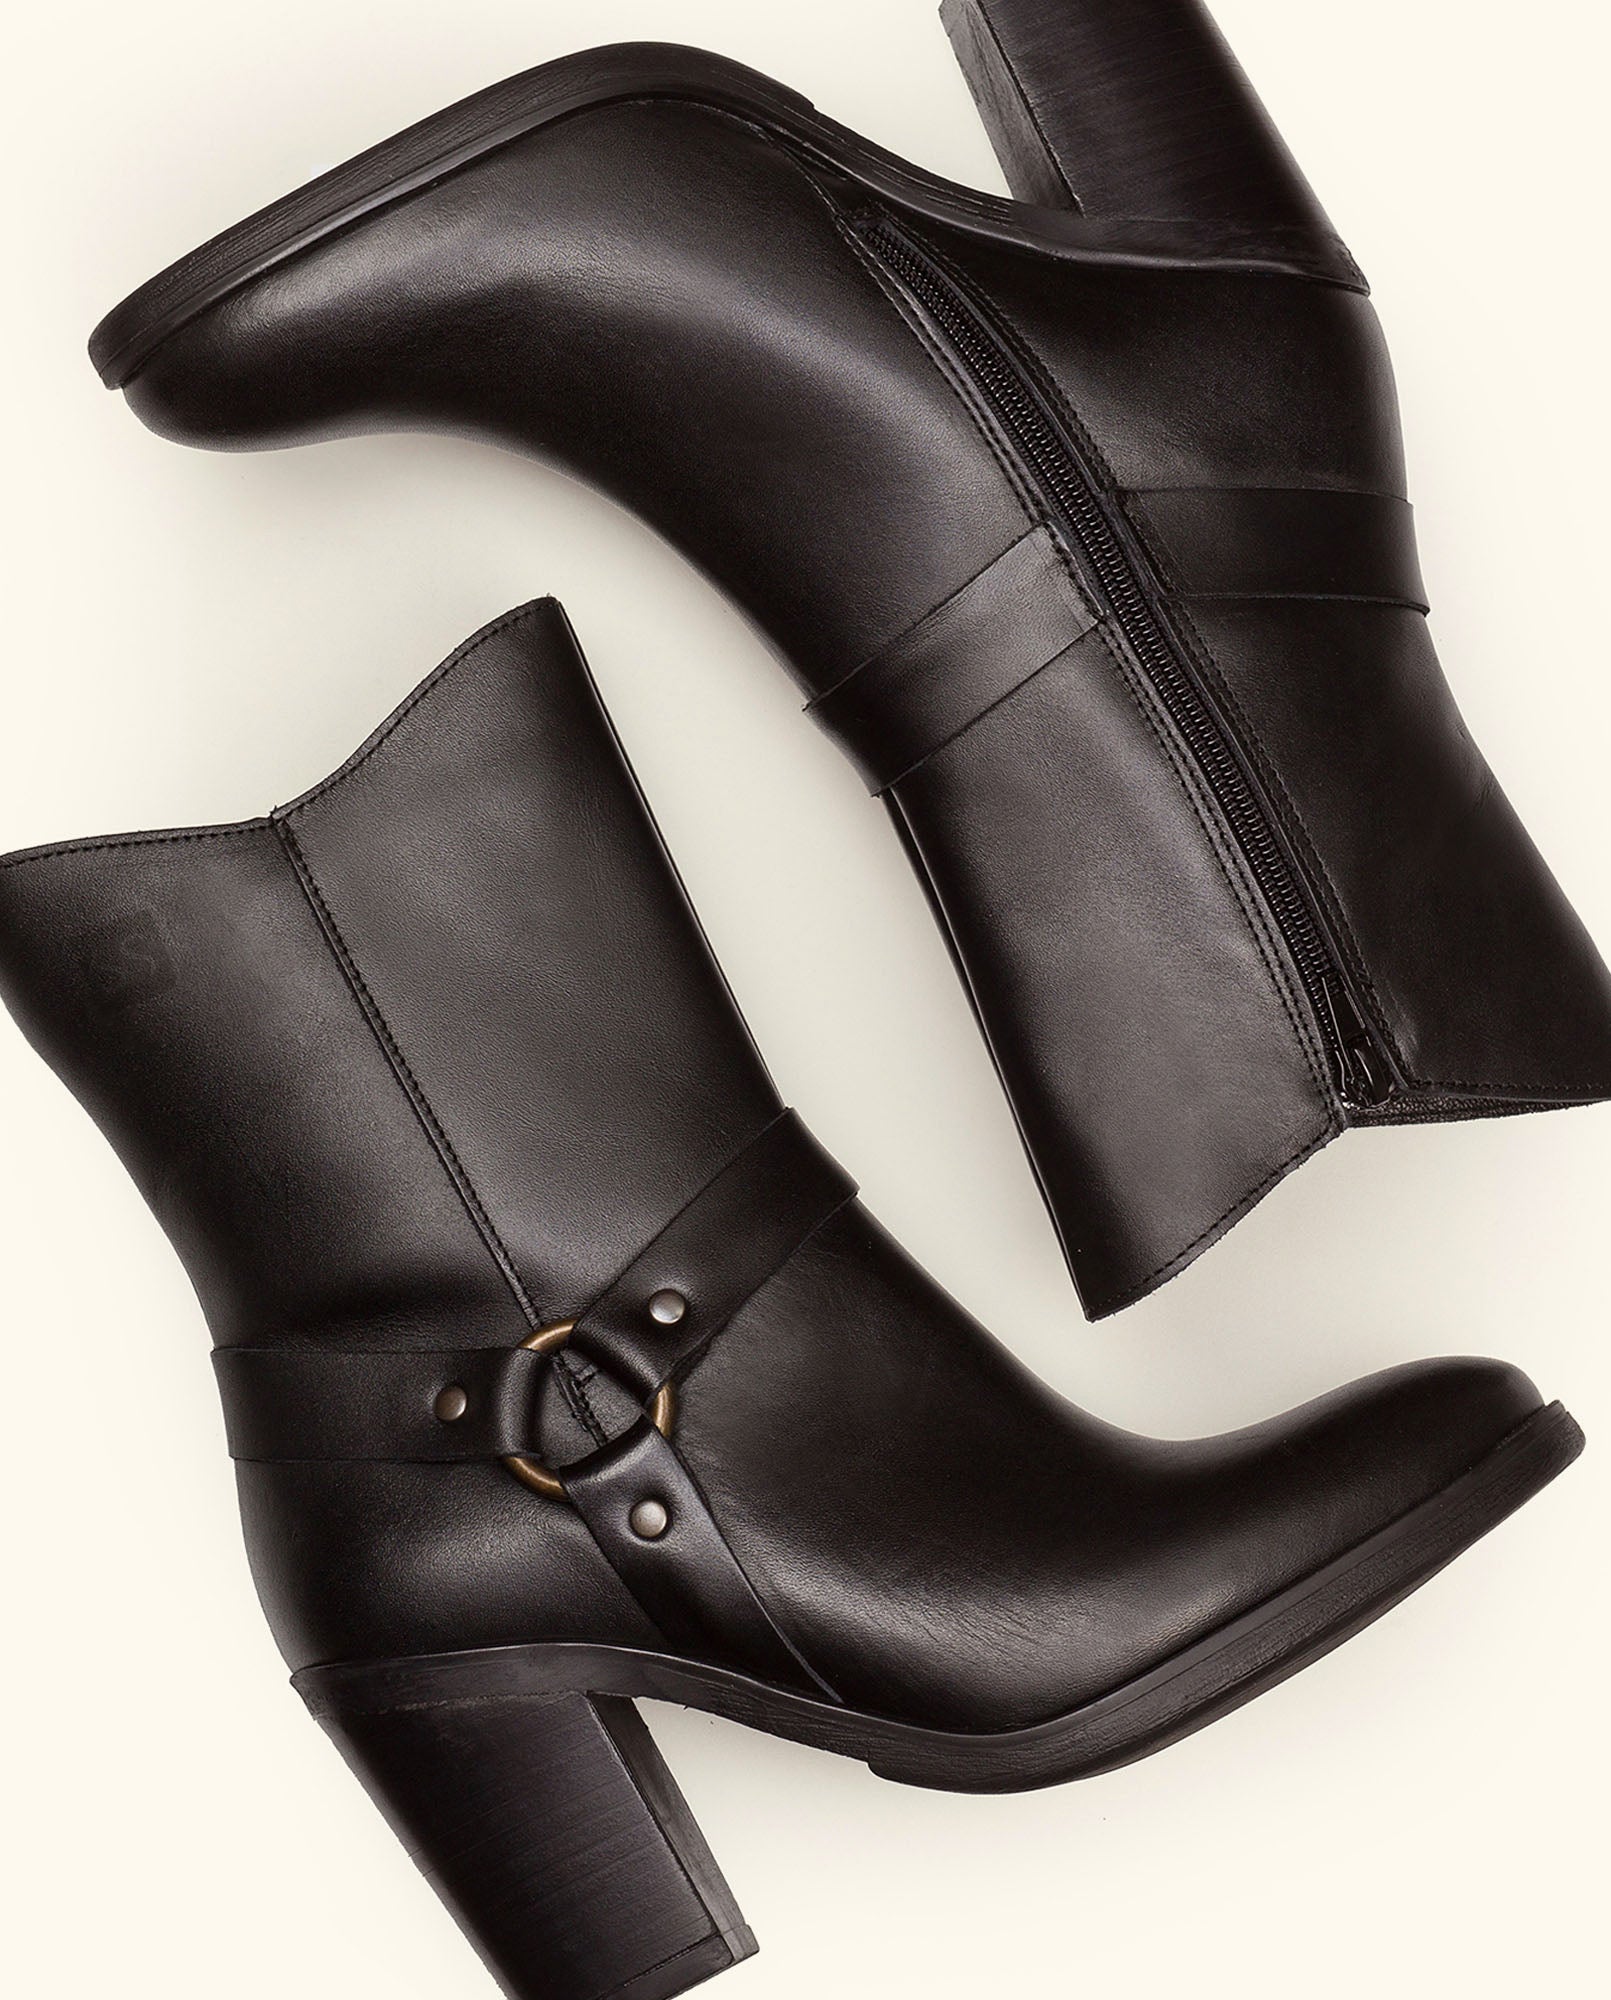 Heeled ankle boot TOURS-008 black